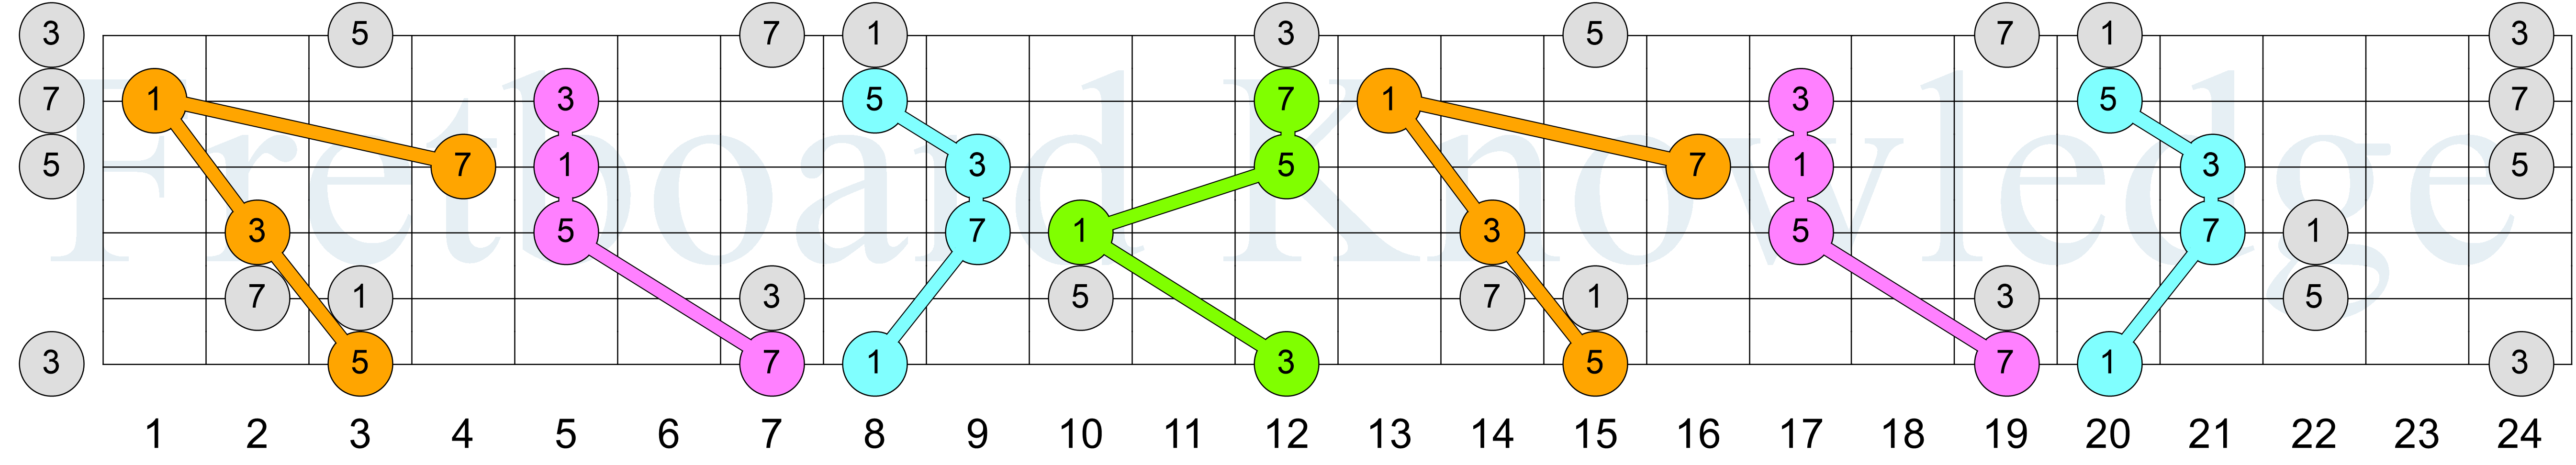 Cmaj7 - Drop 3 - Strings 2346 - Colored Connected